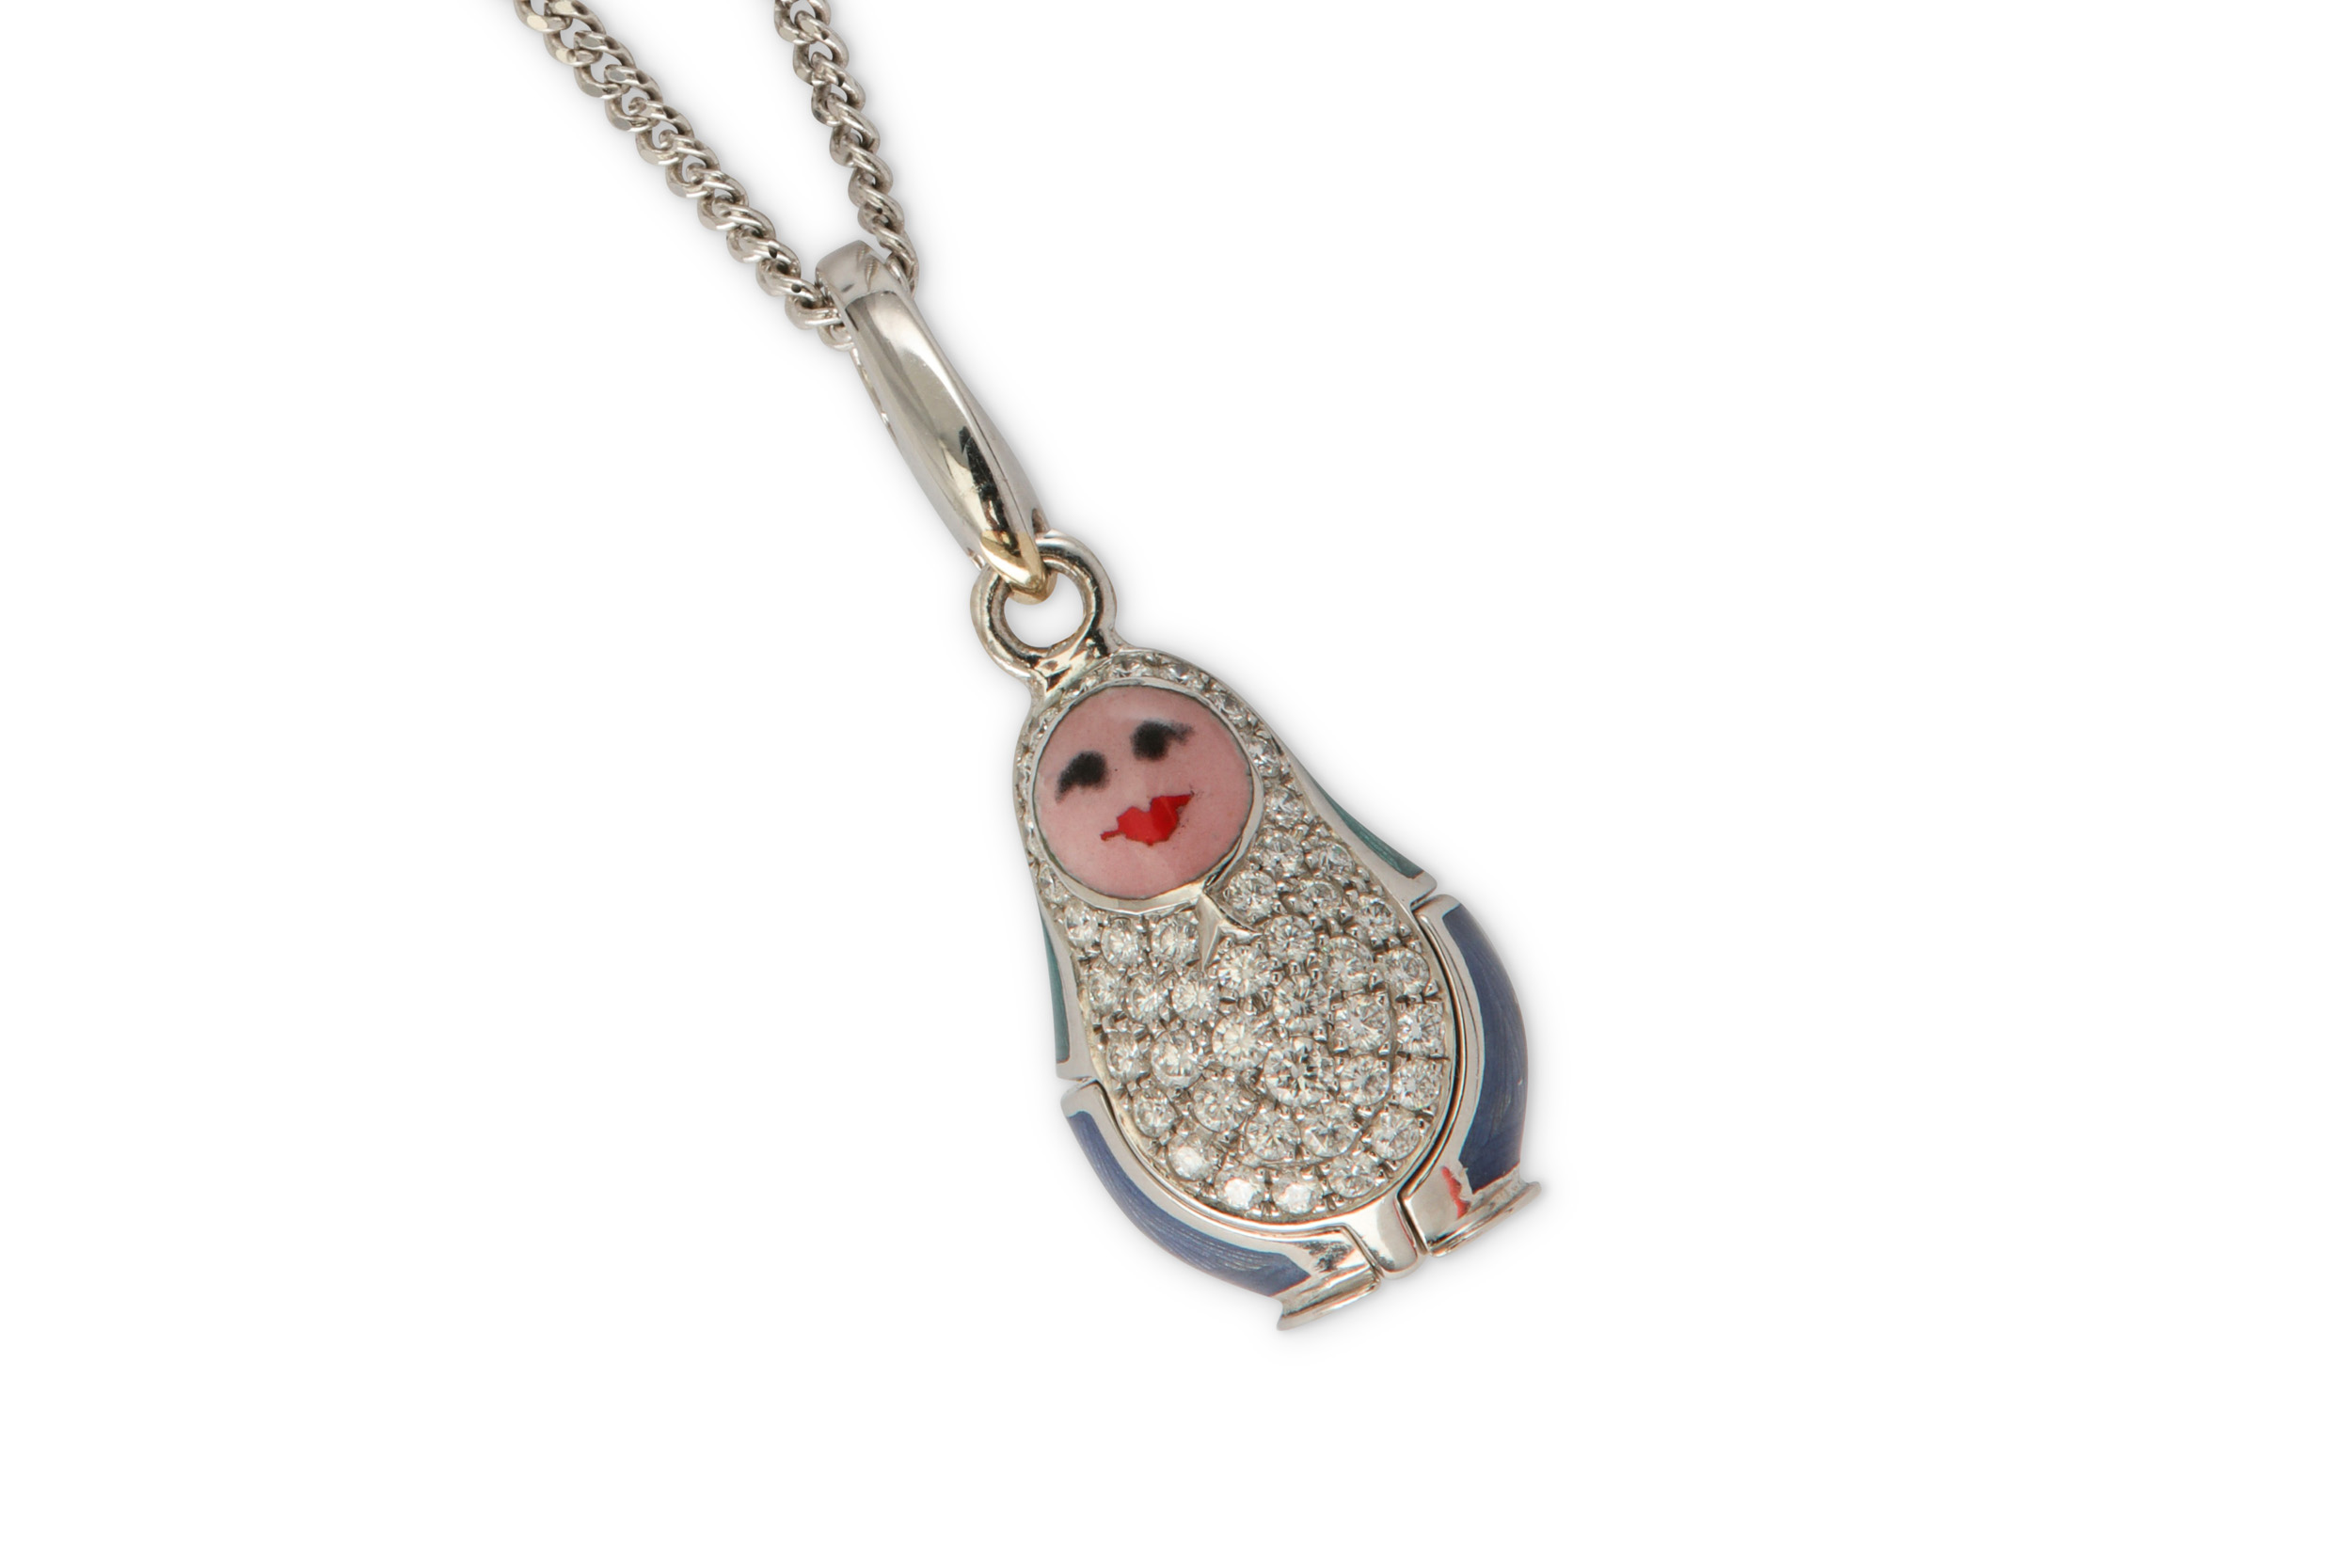 An enamel and diamond charm / pendant, by Fabergé - Image 2 of 2